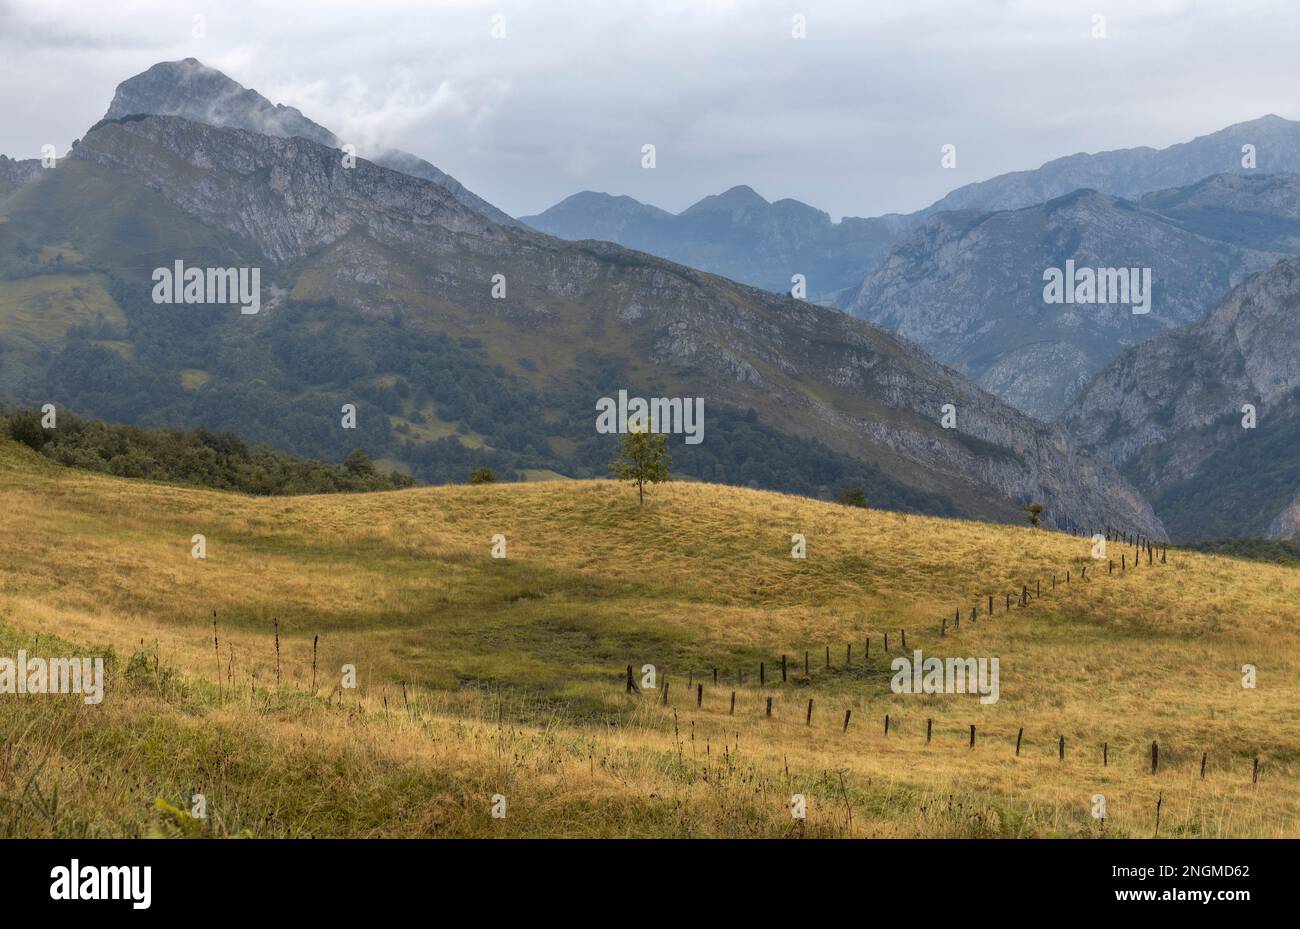 A tranquil scene of natures beauty, with wild grasslands and a majestic mountain range in Asturias, Spain Stock Photo